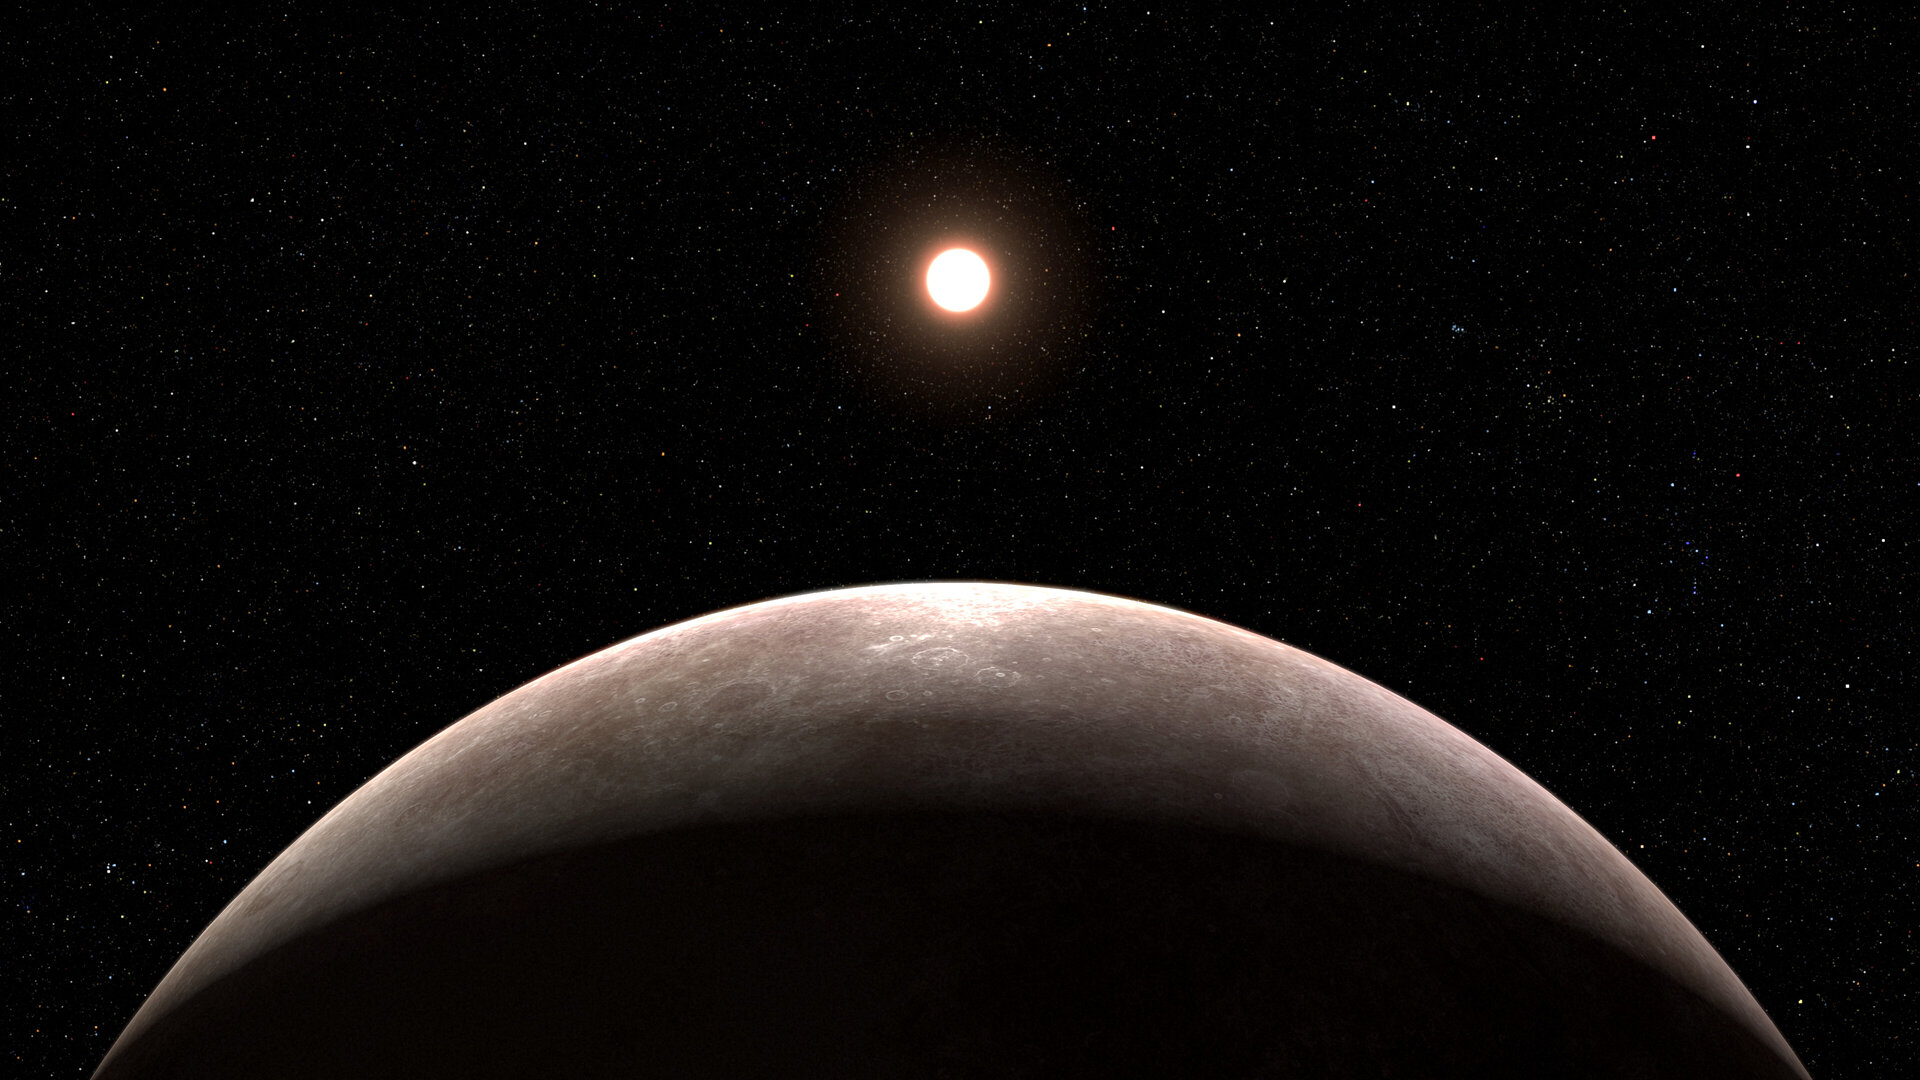 Exoplanet LHS 475 b and its star (Illustration)